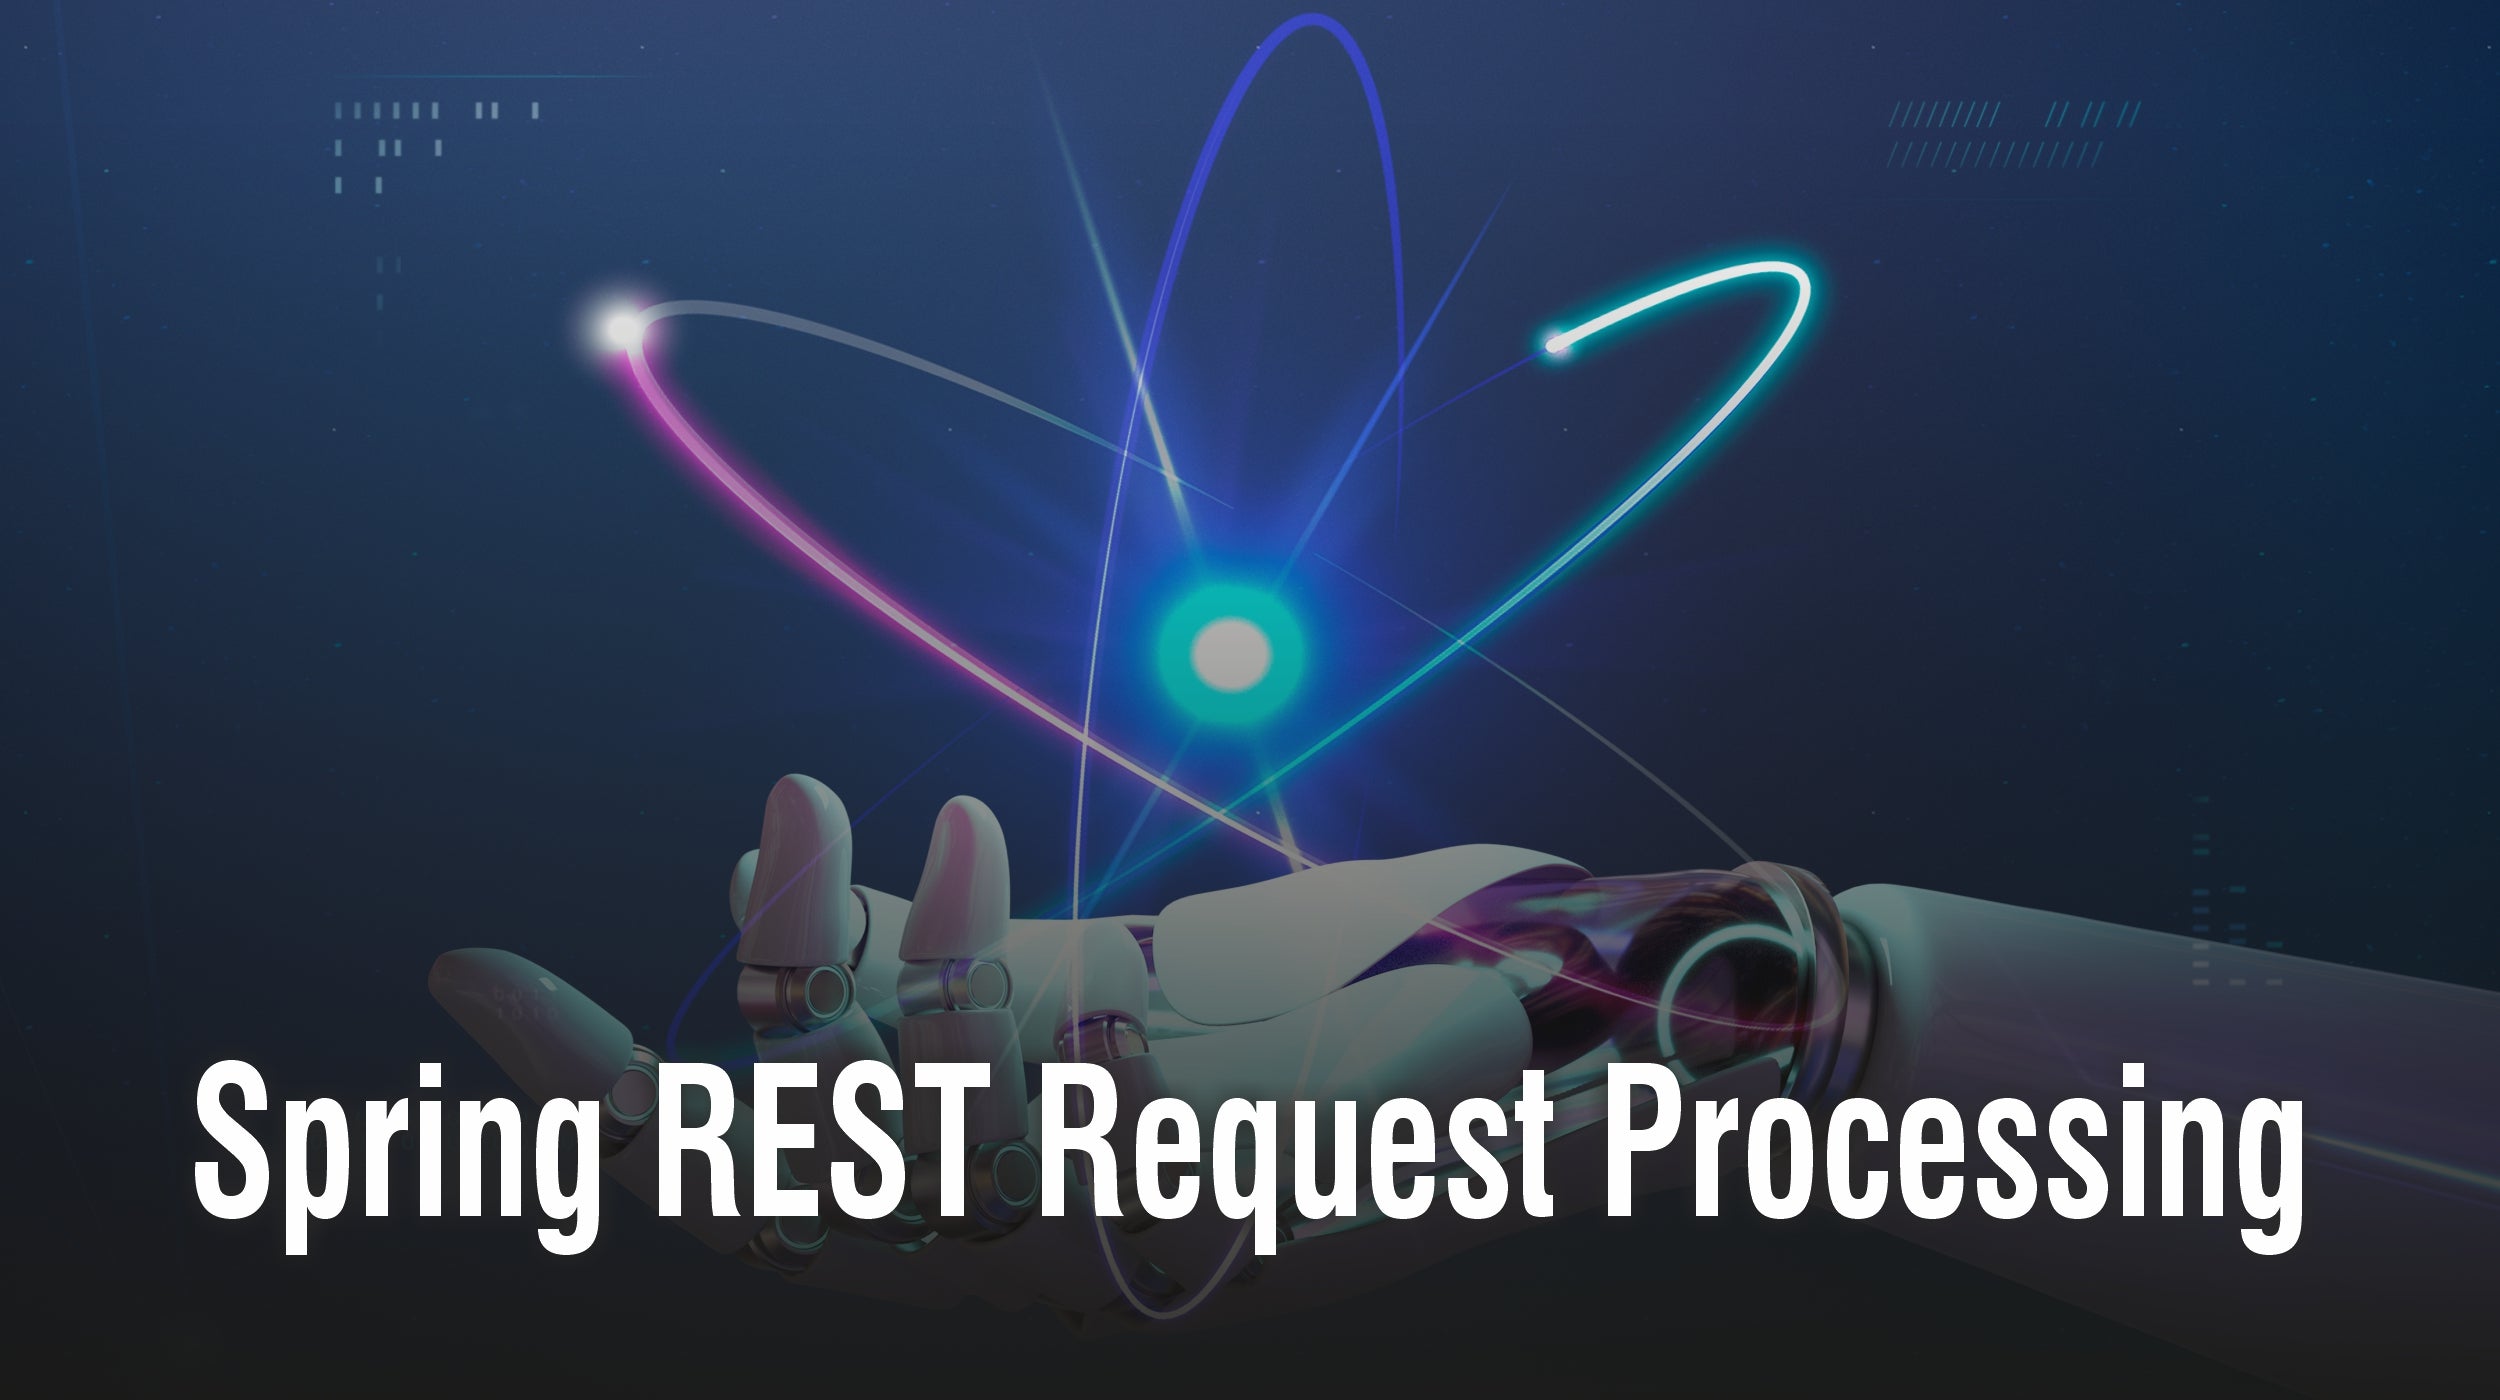 Spring REST Request Processing